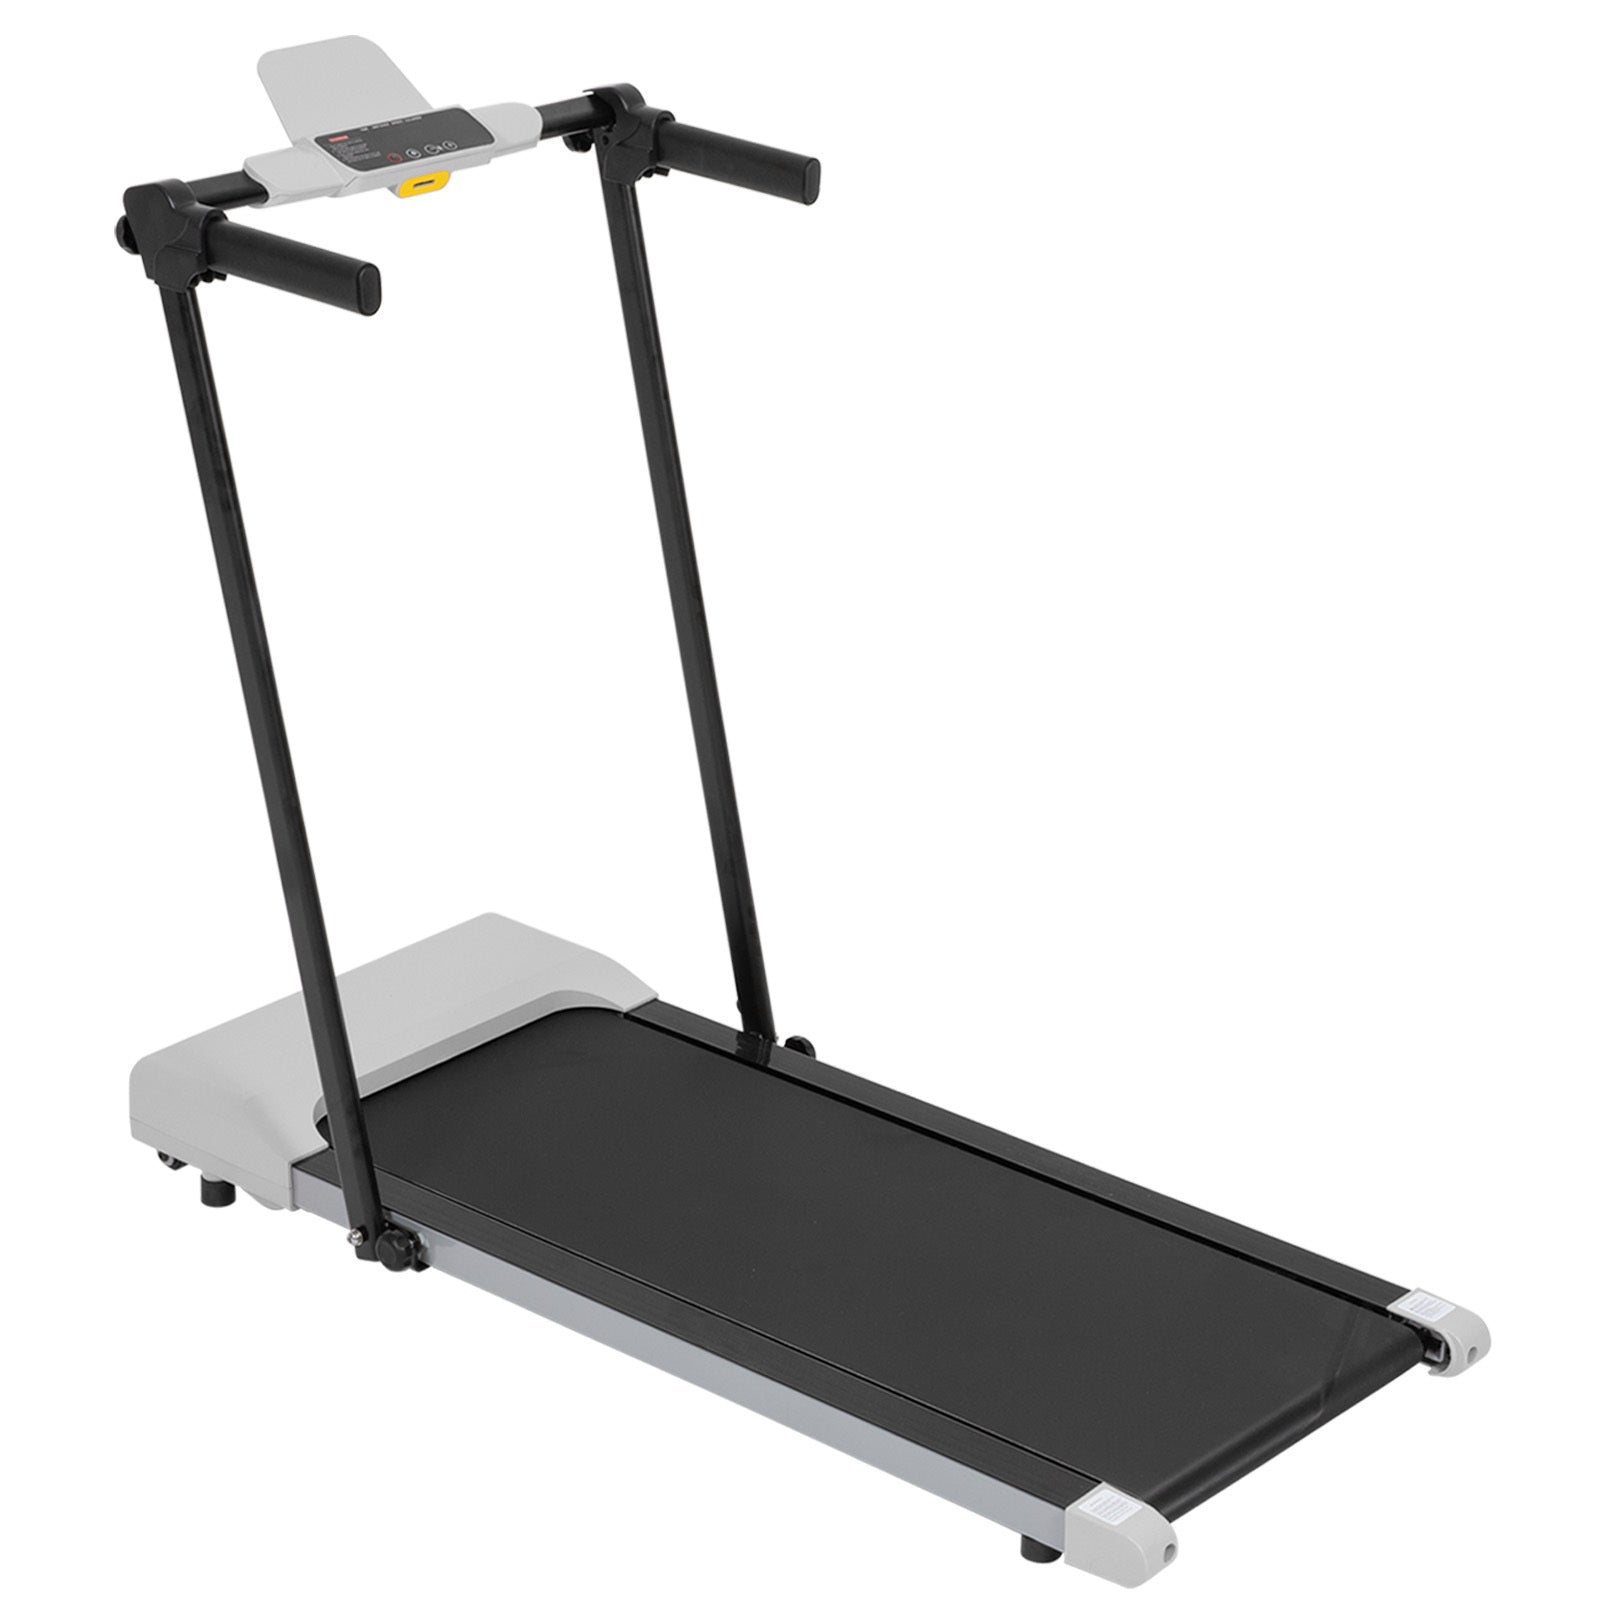 Treadmills for Home, Treadmill with LED for Walking & grey-iron